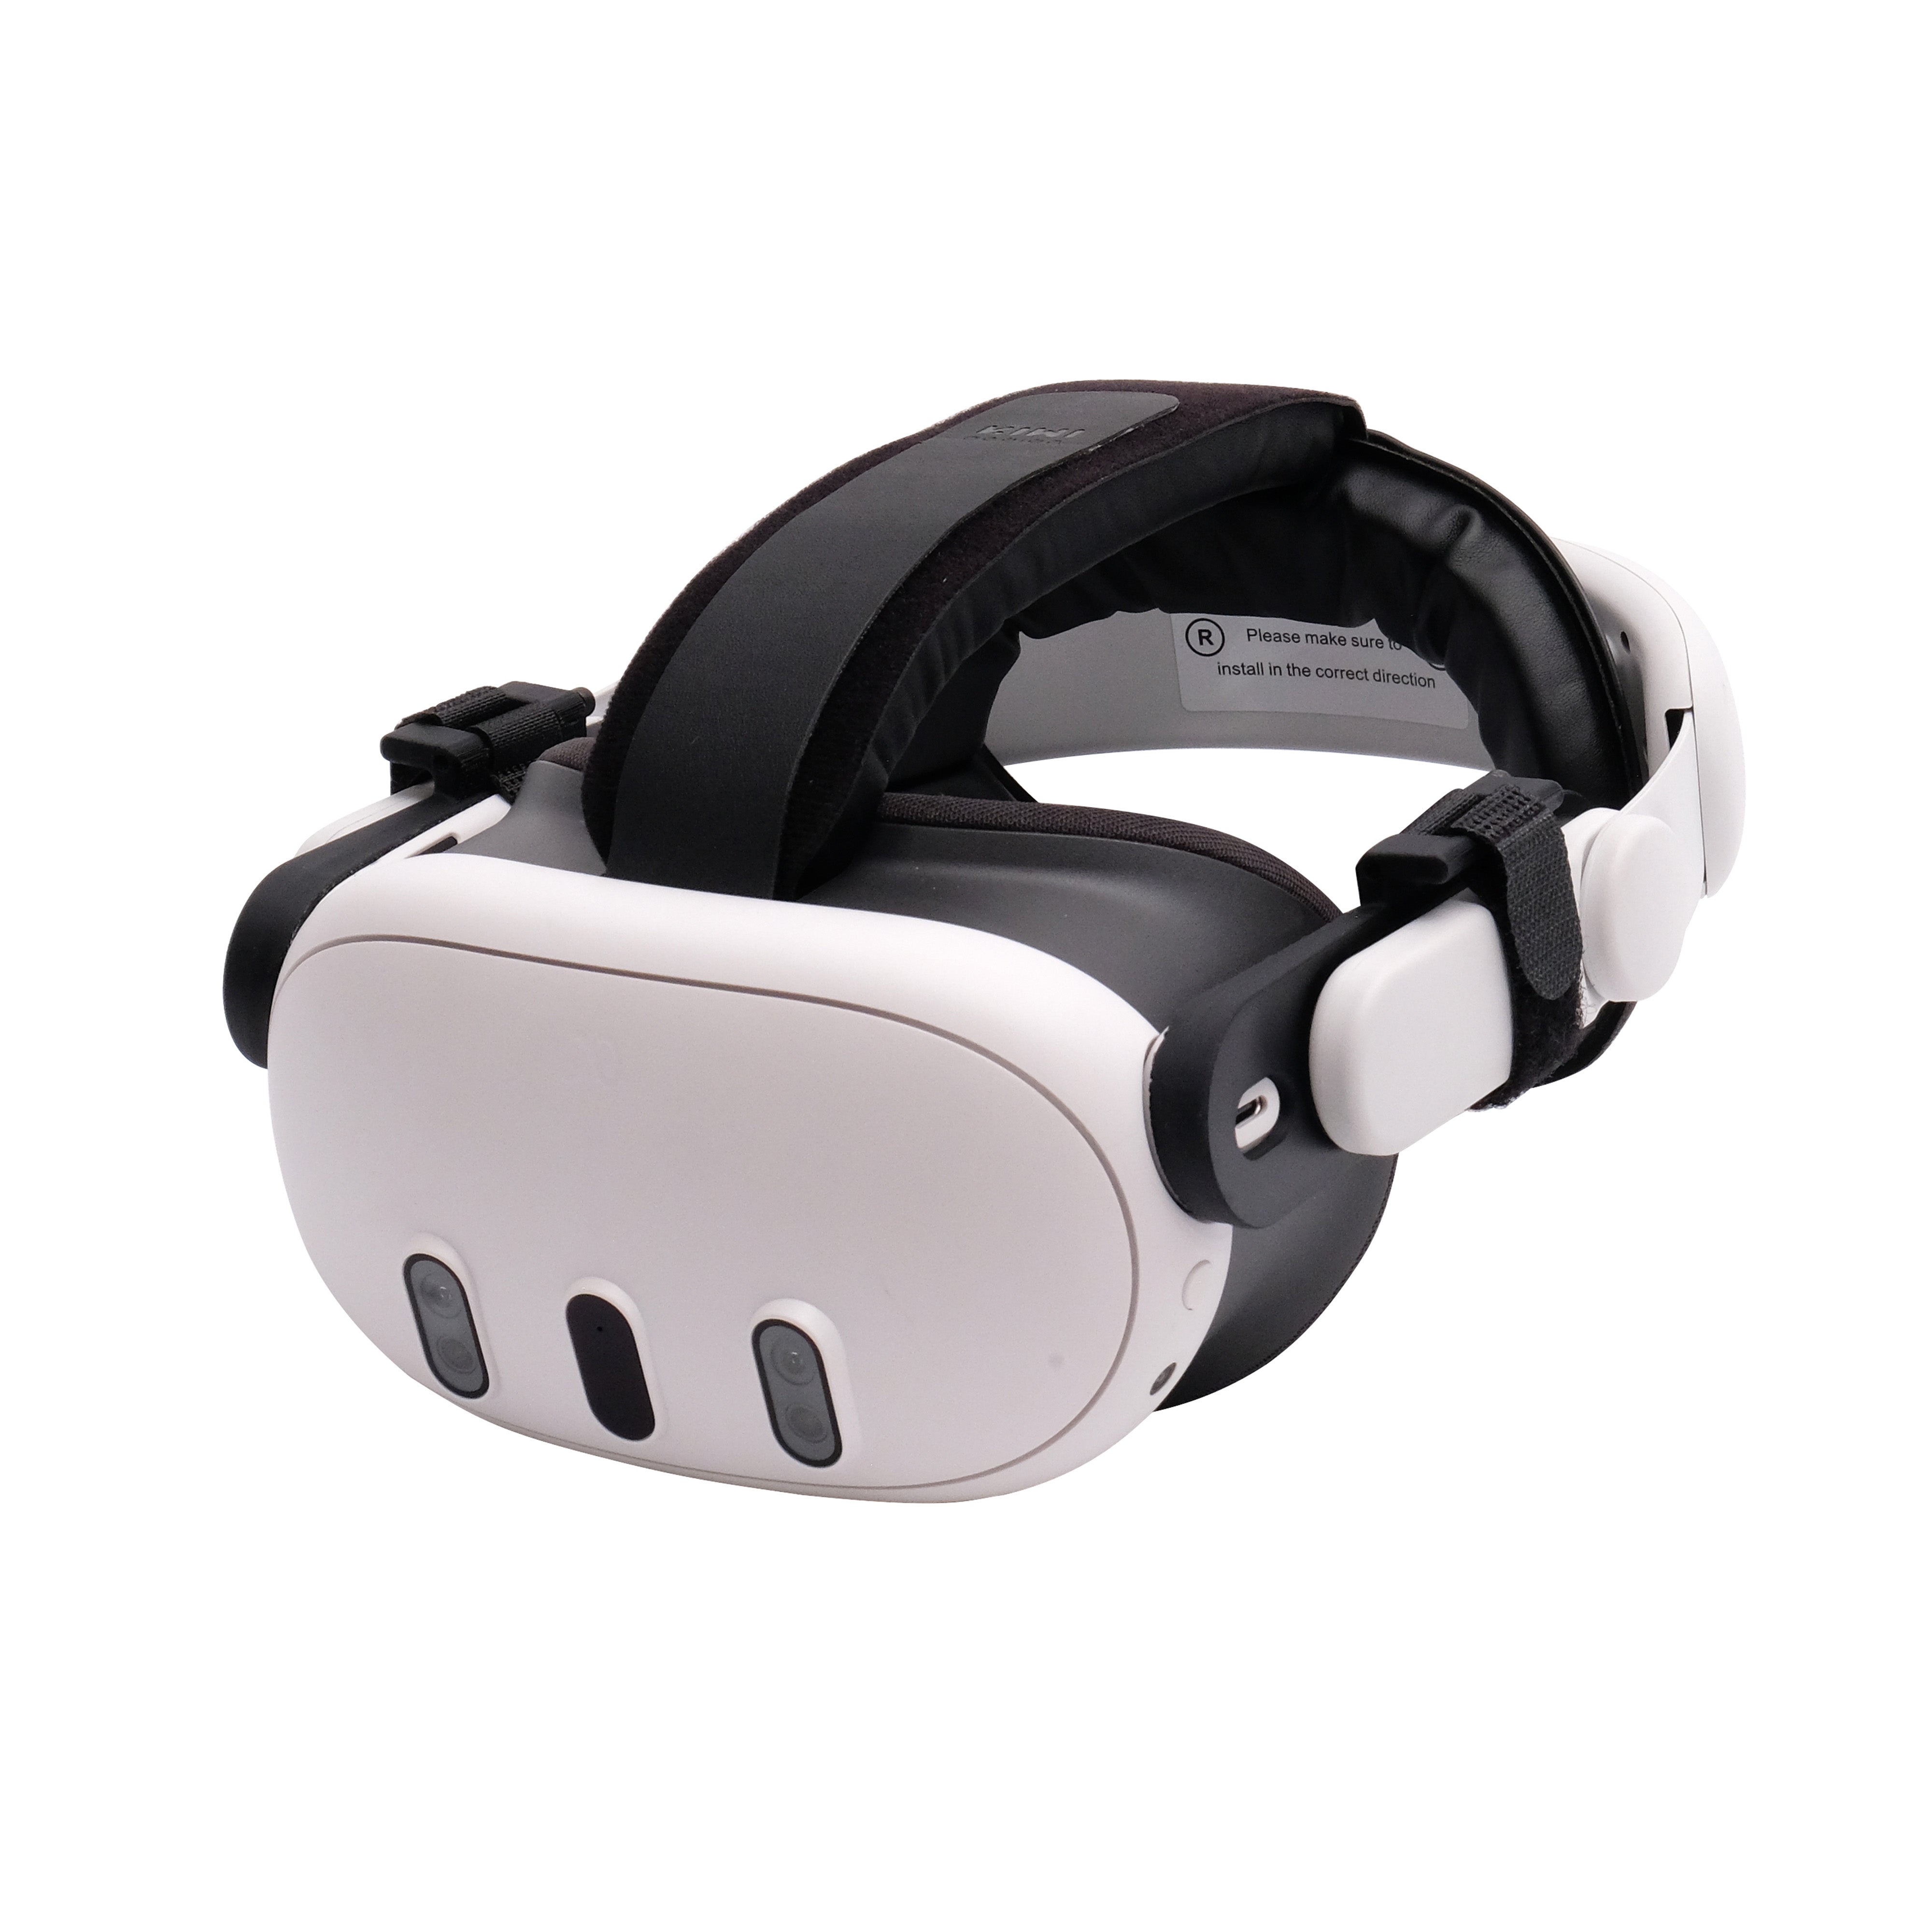 Quest 2 to Quest 3 Headset Adapter - Headset Adapter That Lets You Use a Quest 2 Headstrap On Your Quest 3 - DeadEyeVR